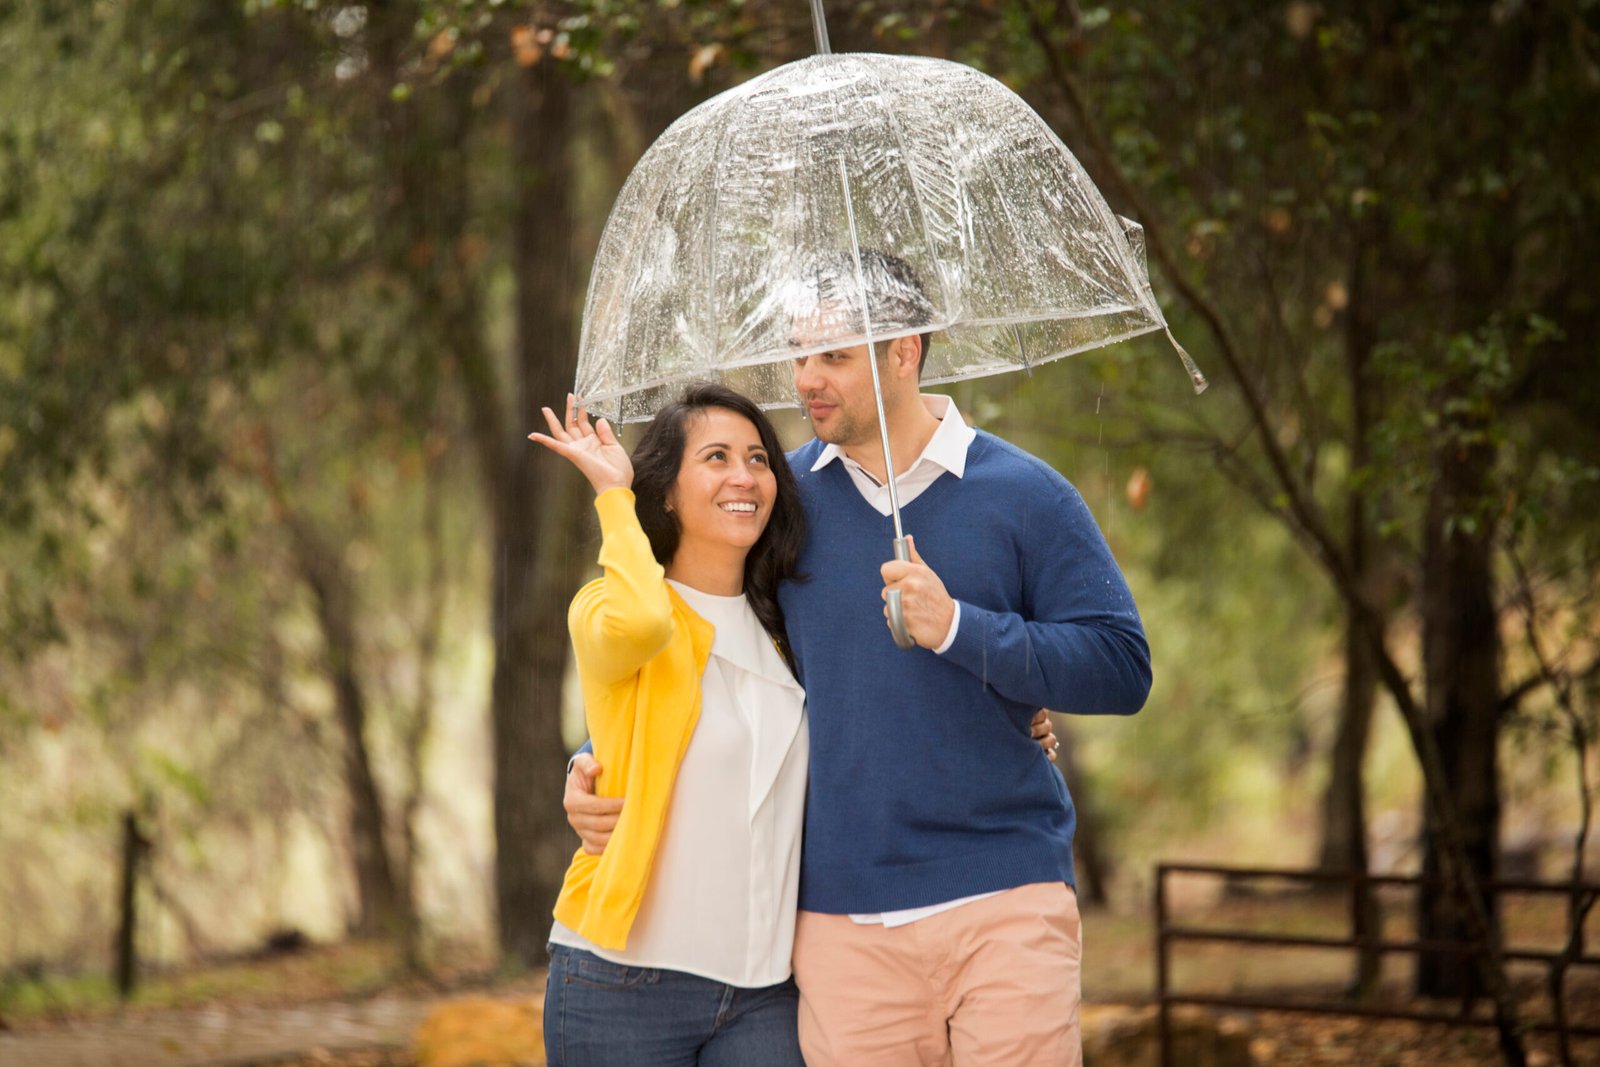 couple walking together under a clear umbrella